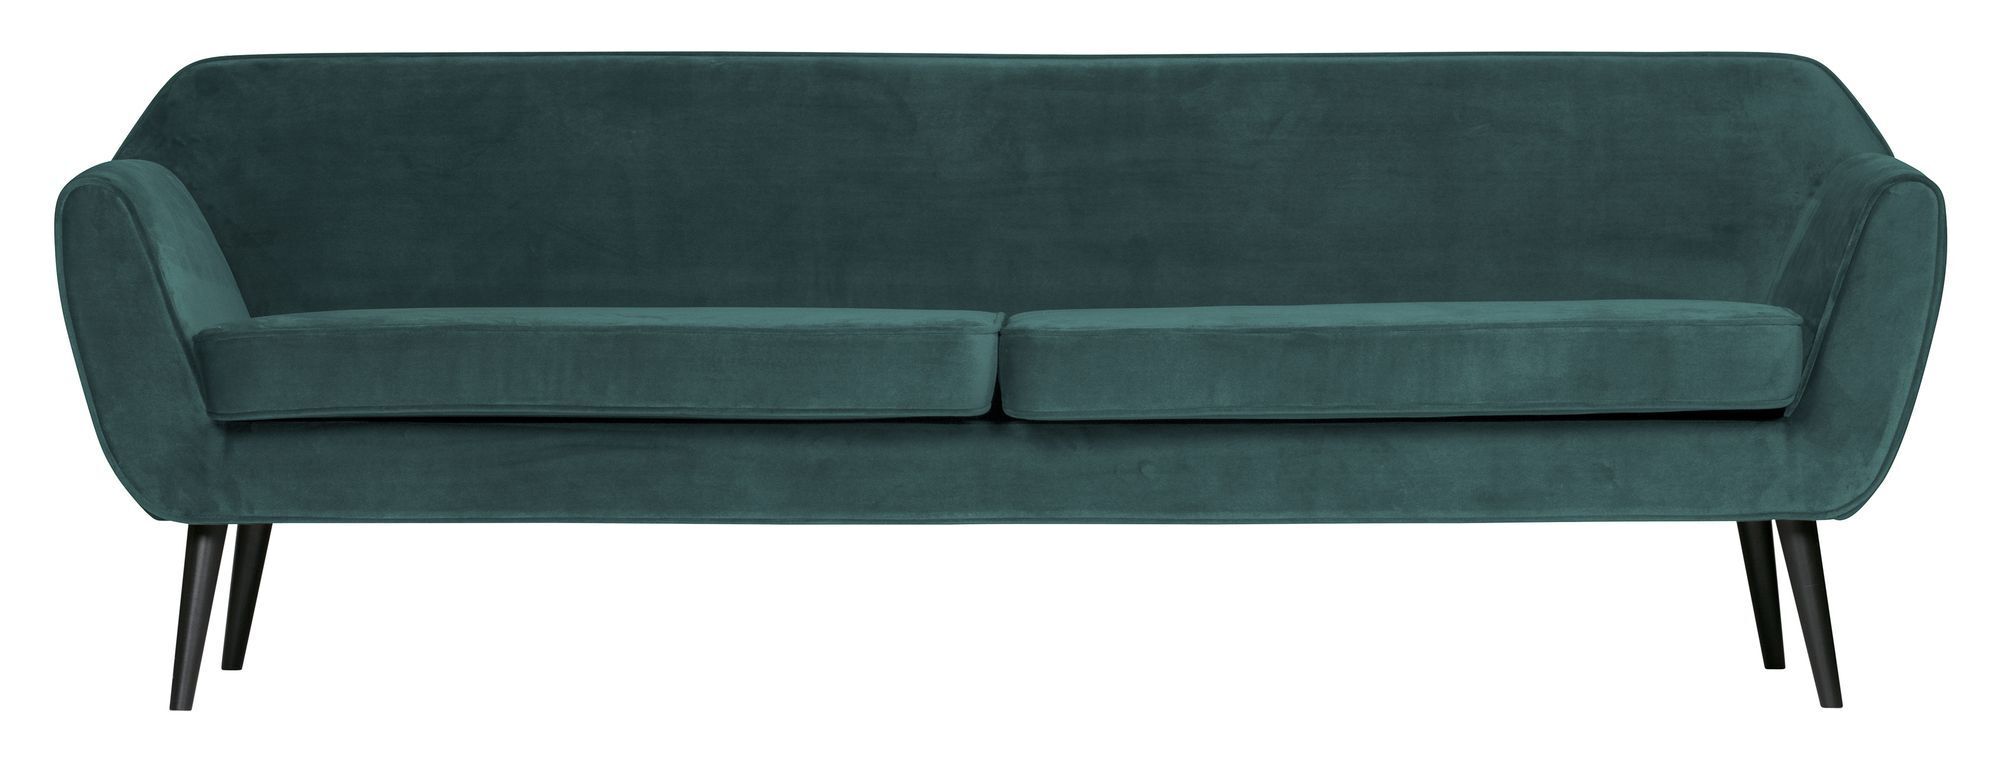 Woood Rocco 4-pers Sofa - Teal Velour   Unoliving